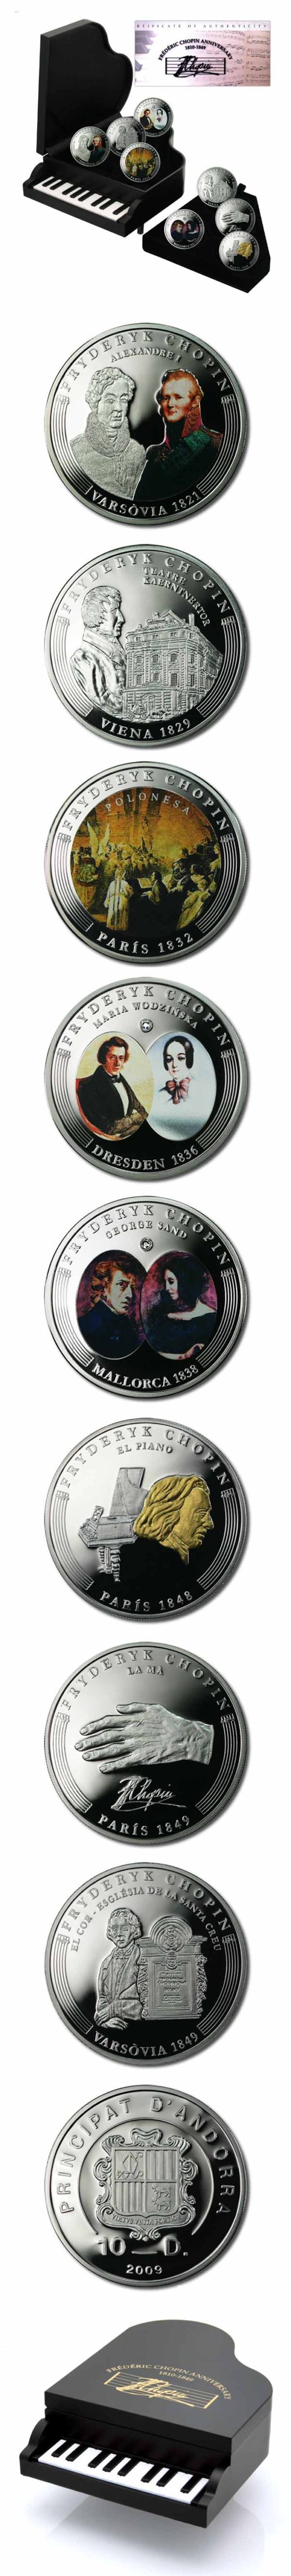 Andorra - Life of Frederic Chopin - 8 Coin Set - 2009 - Proof Silver Crowns - Mint Packaging